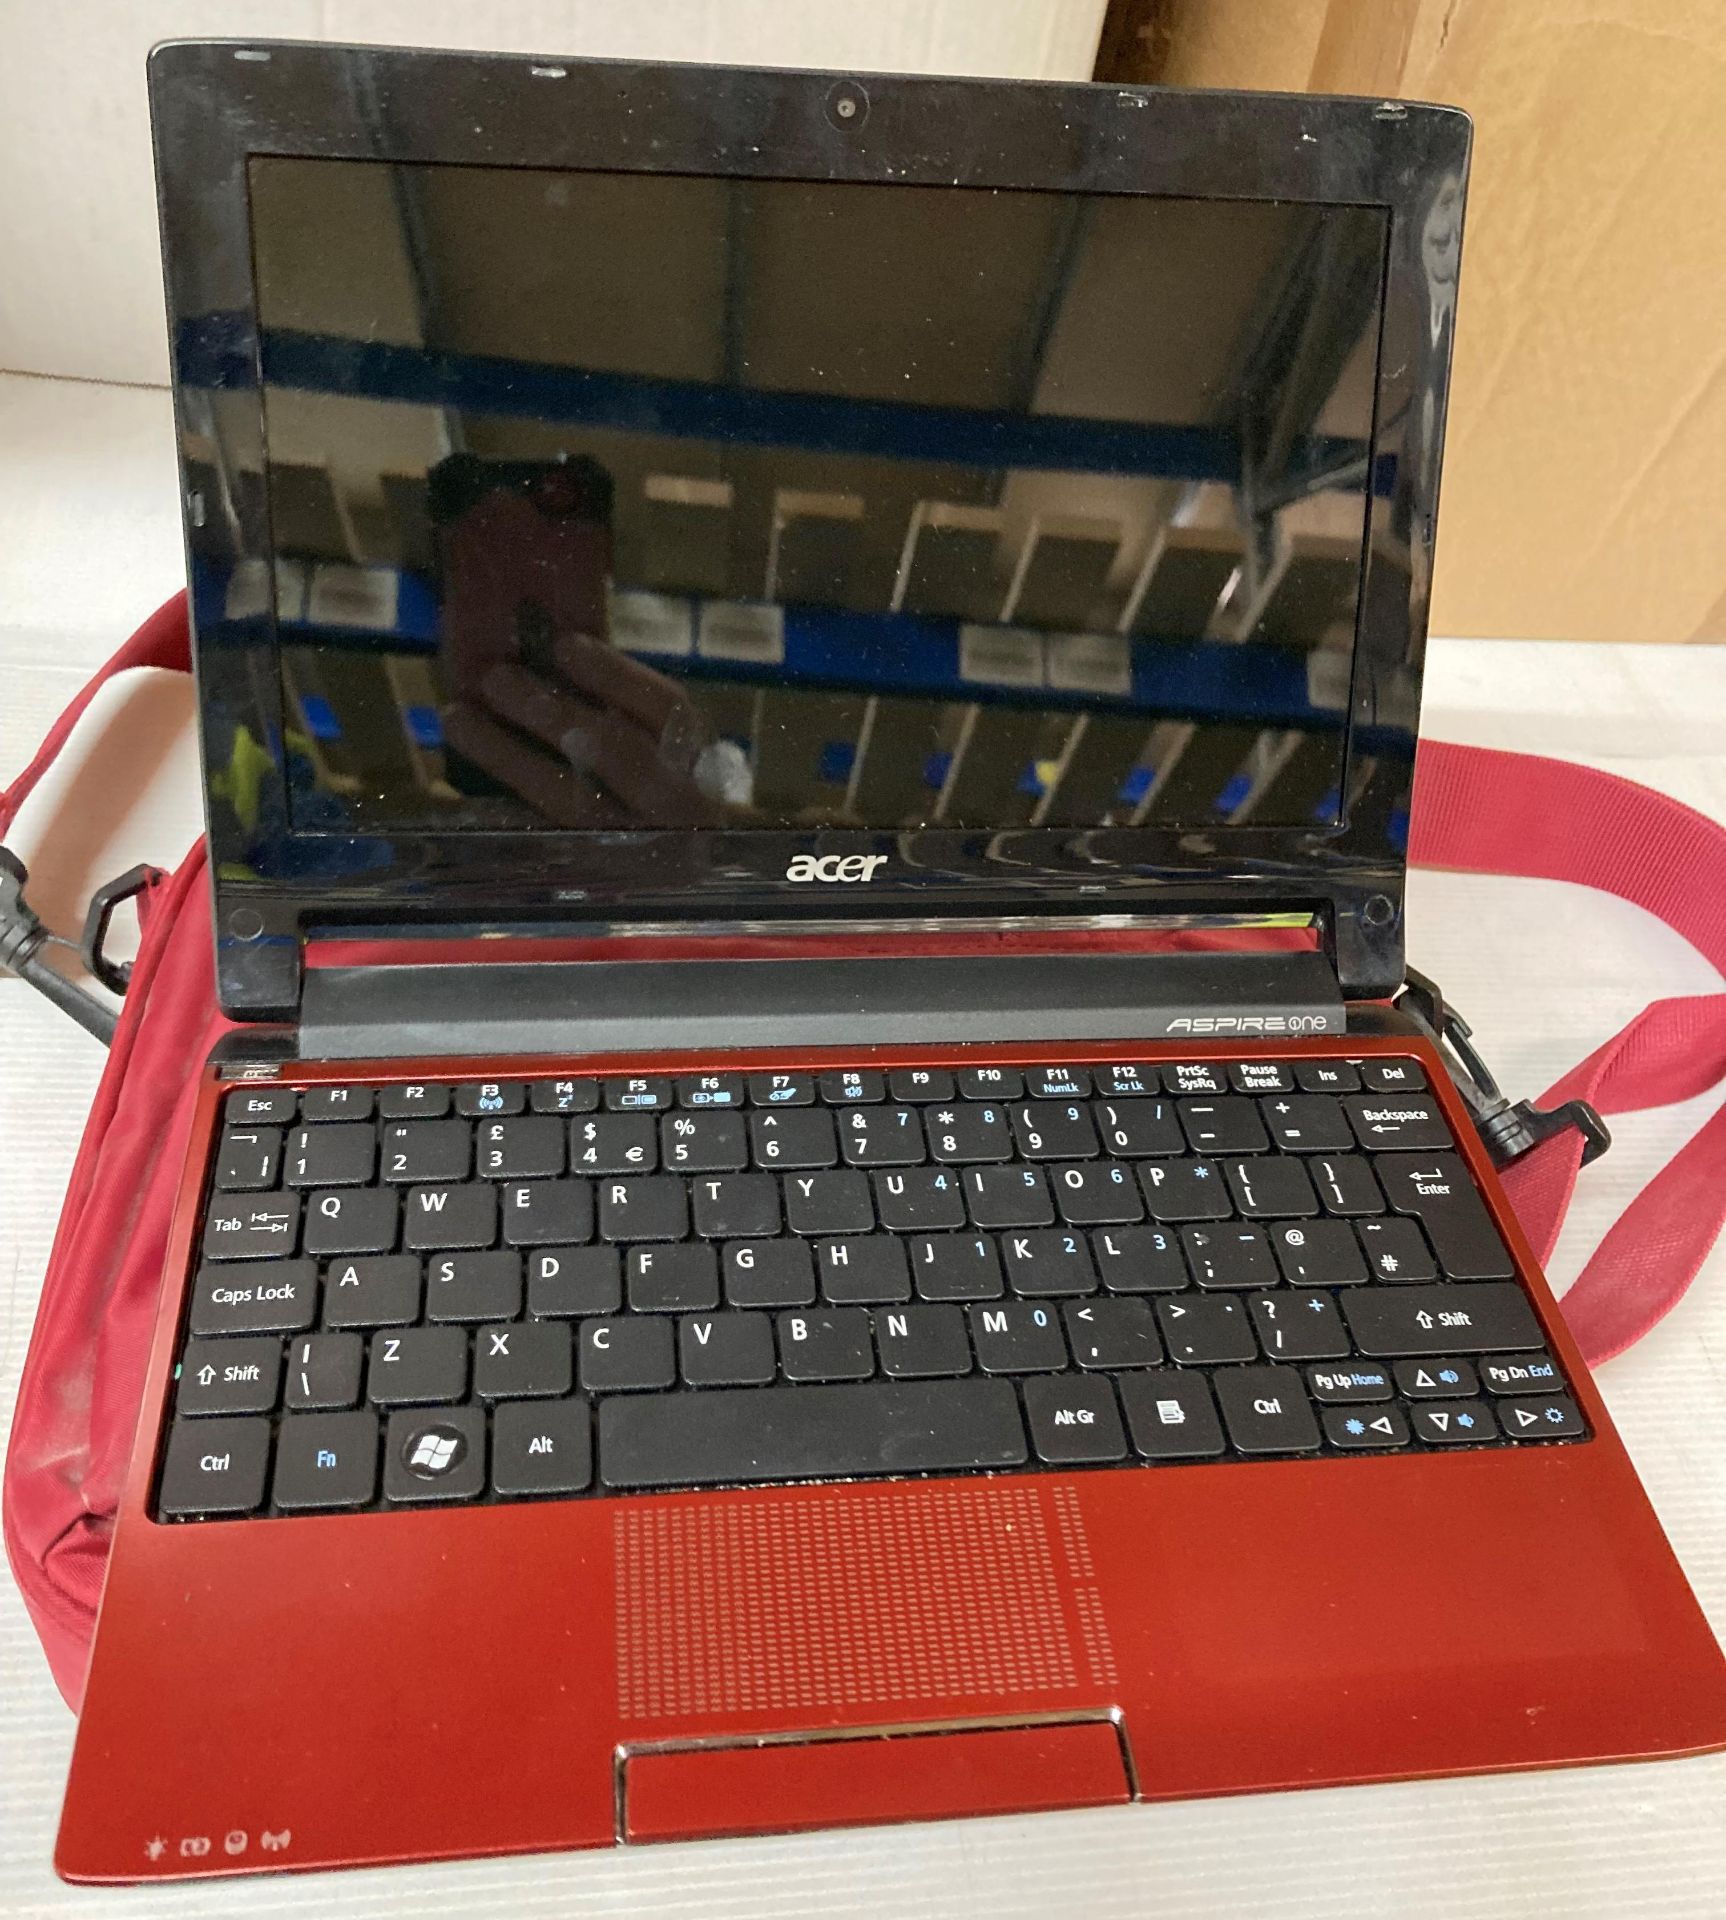 Acer Aspire One LAPTOP Intel Atom 1GB RAM 250GB HD - complete with carry case (M12) - Image 2 of 2